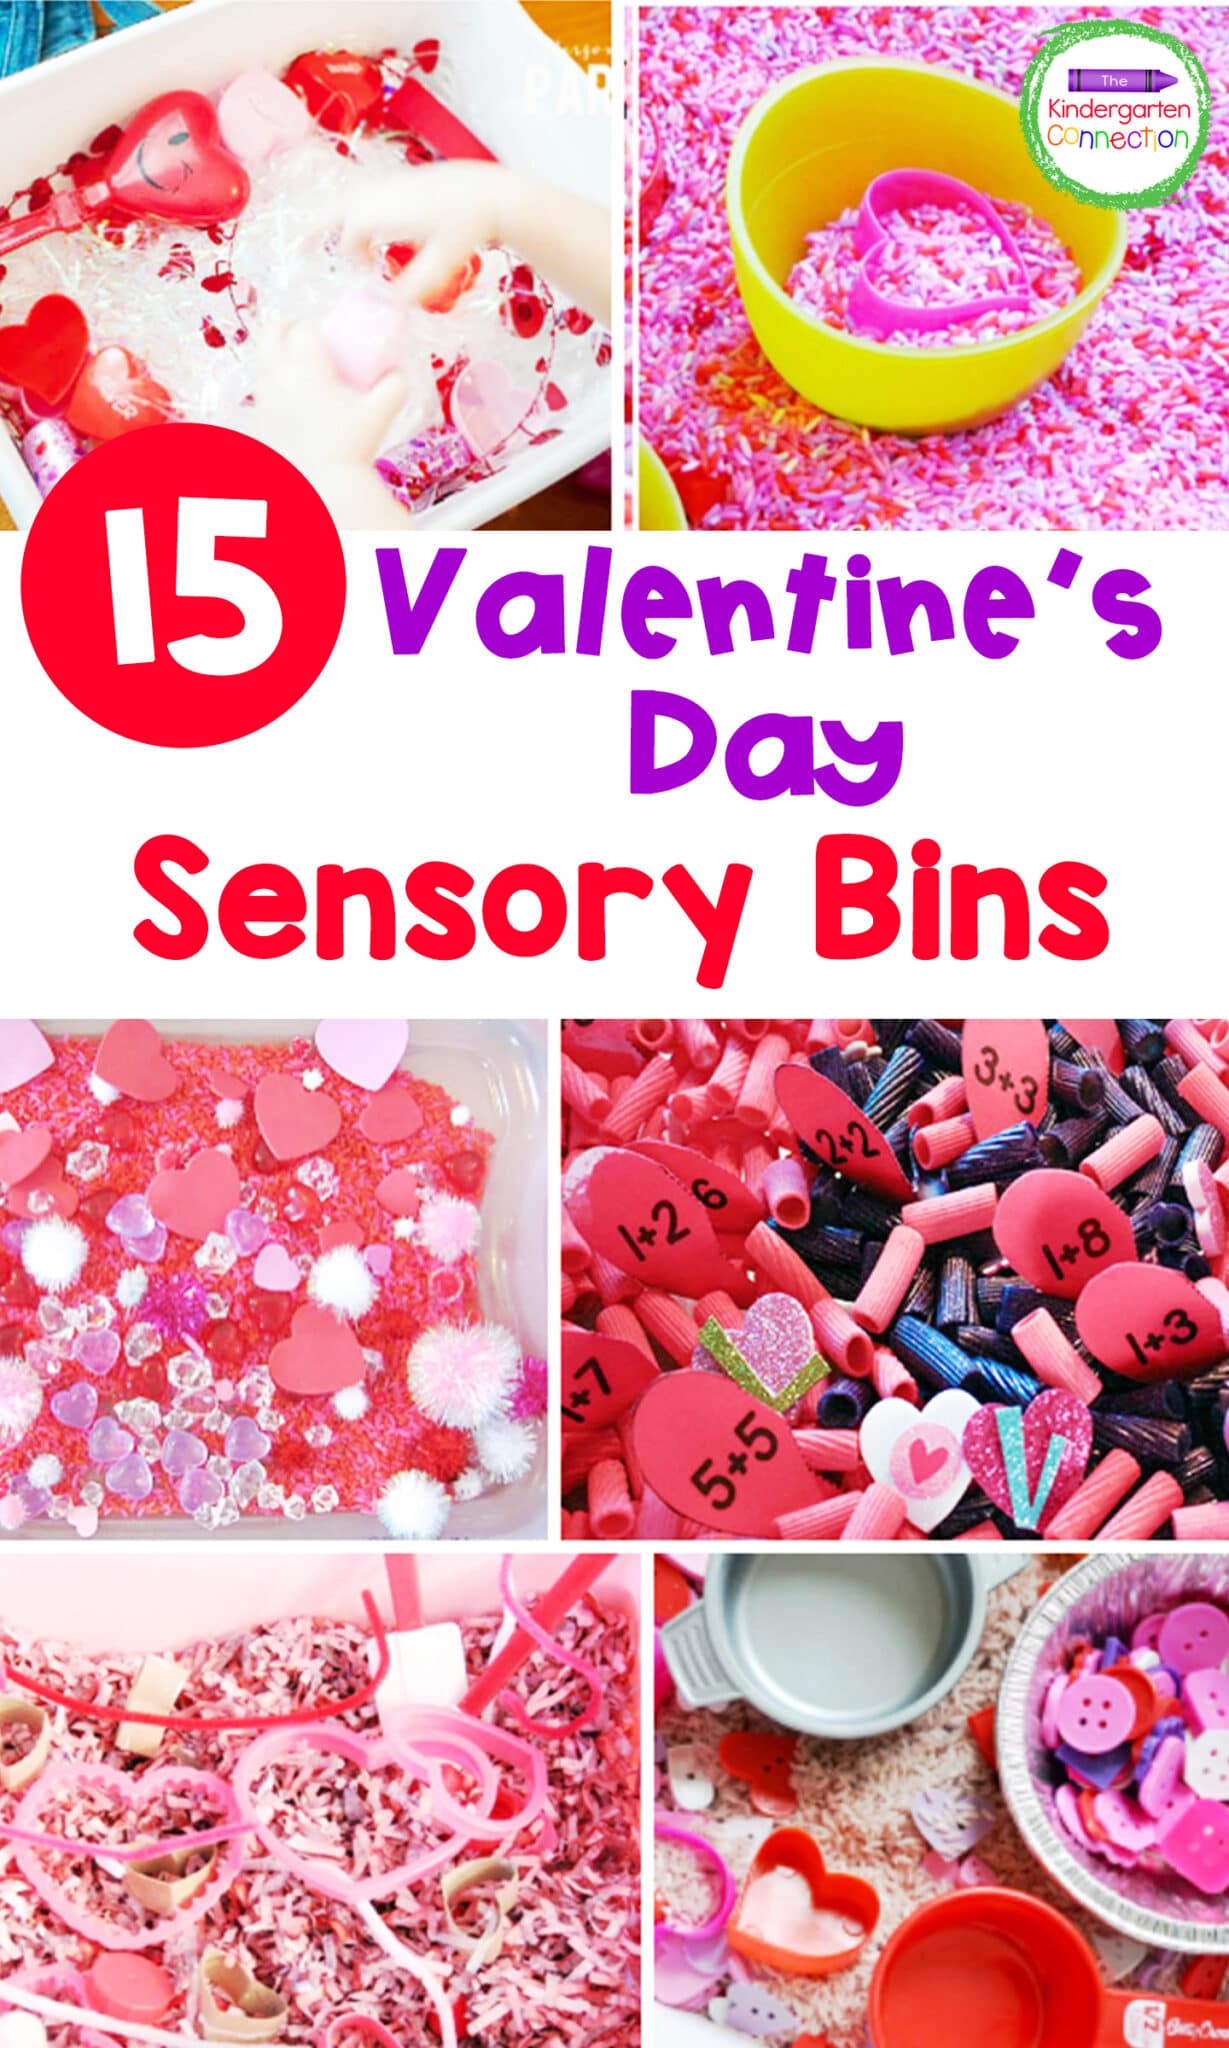 Incorporate hands-on learning and check out these awesome Valentine's Day Sensory Bins for Pre-K & Kindergarten!